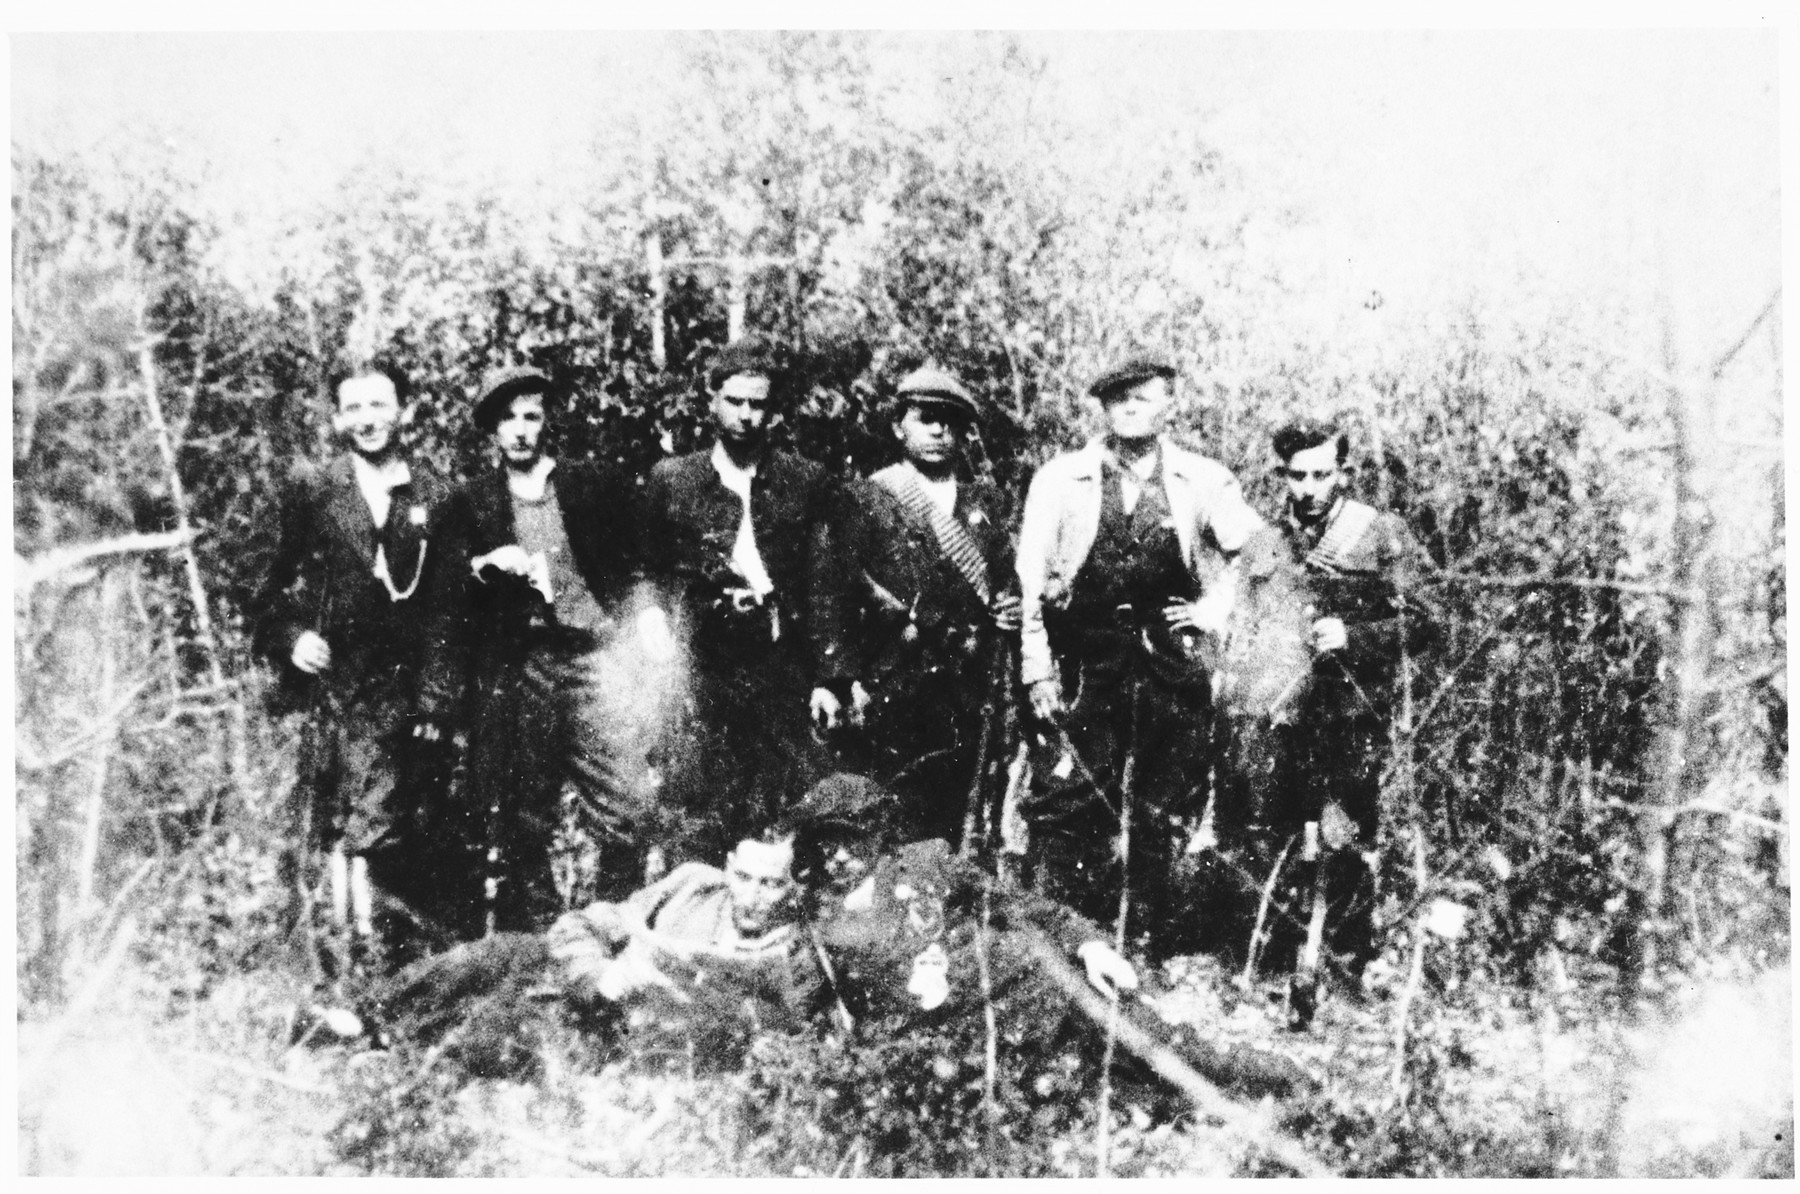 Group portrait of Jewish partisans in the forest.